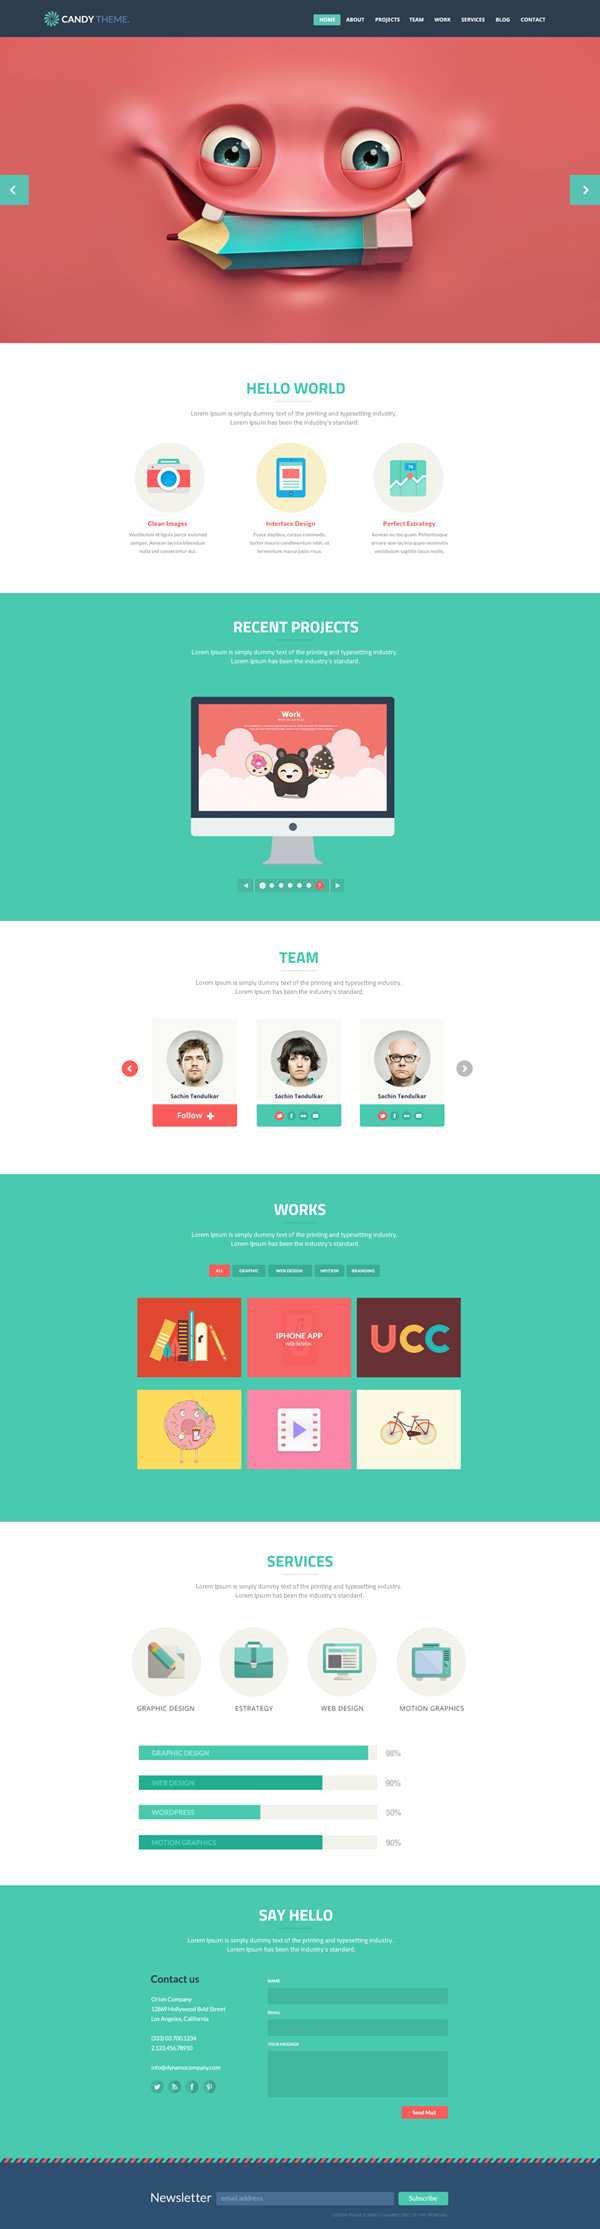 Candy - Flat Onepage Responsive HTML5 Template - 1